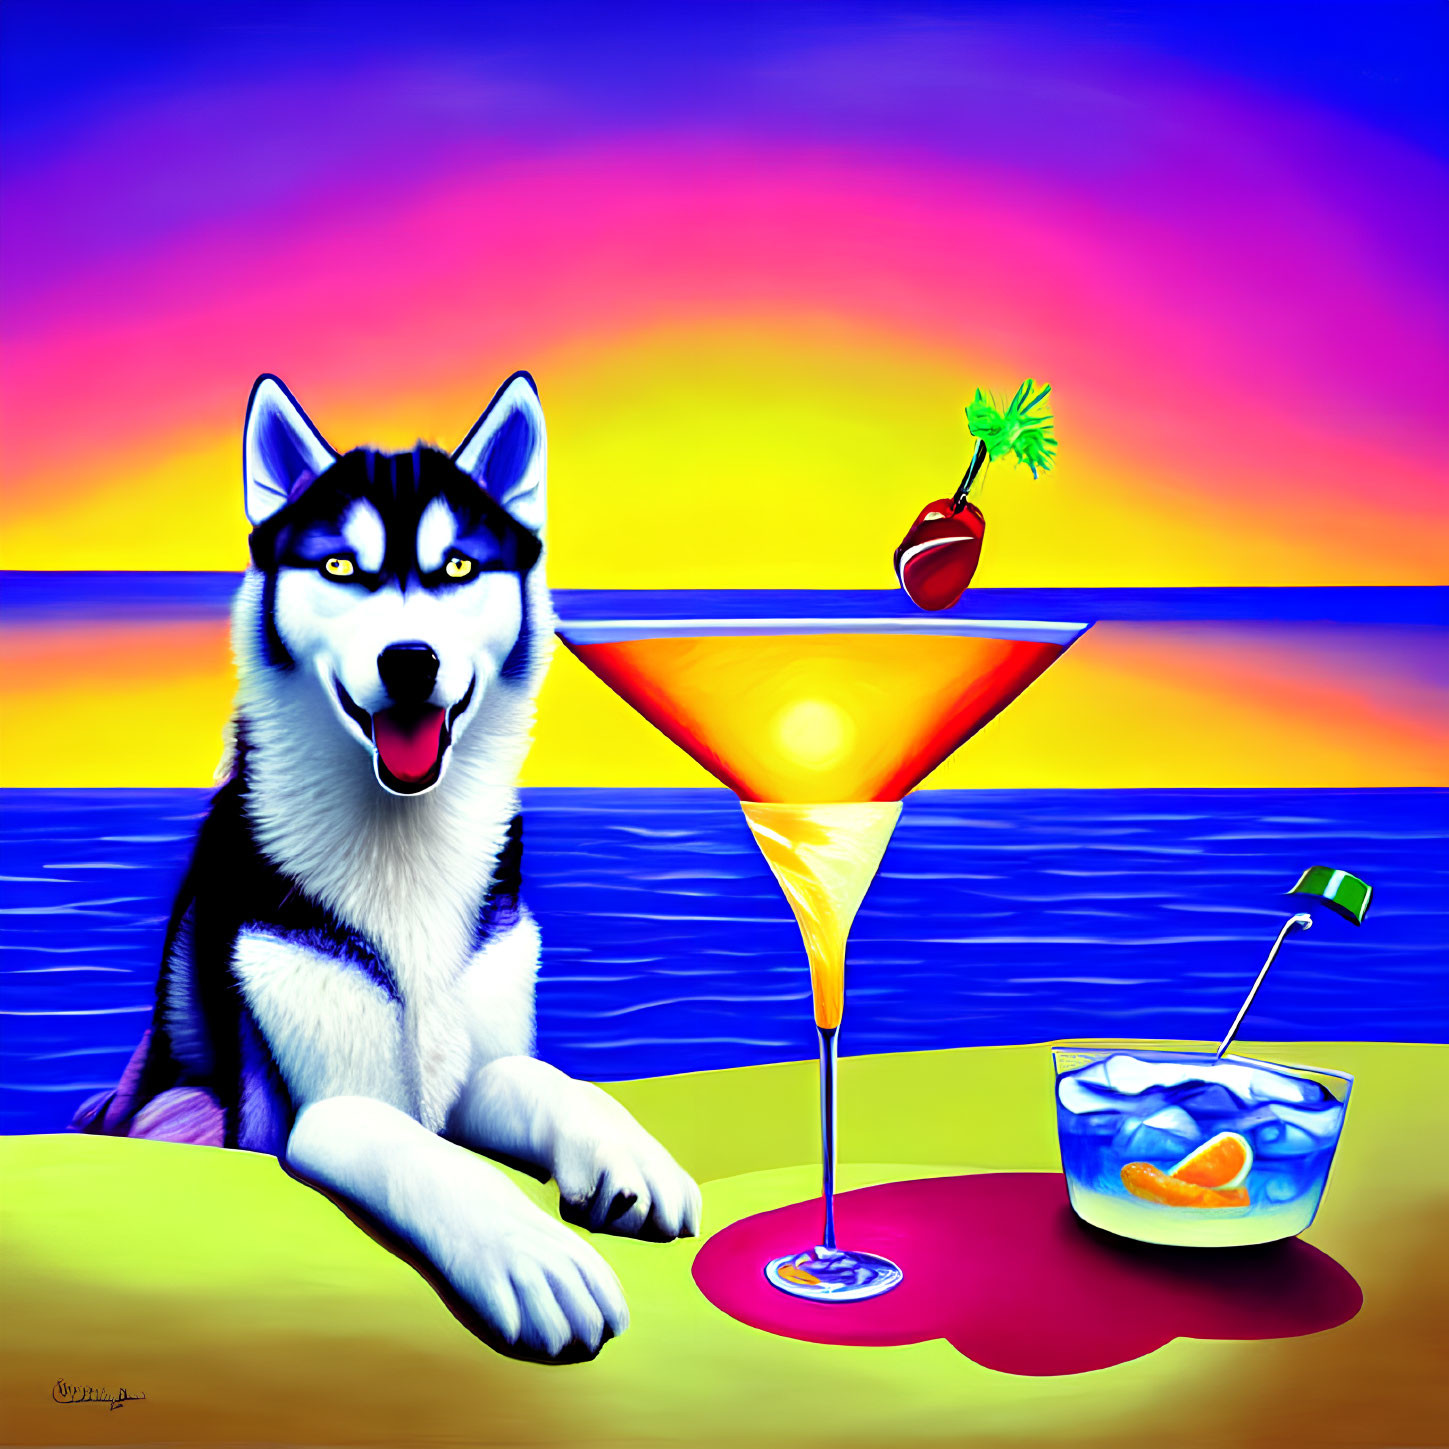 Siberian Husky with cocktail on beach at sunset